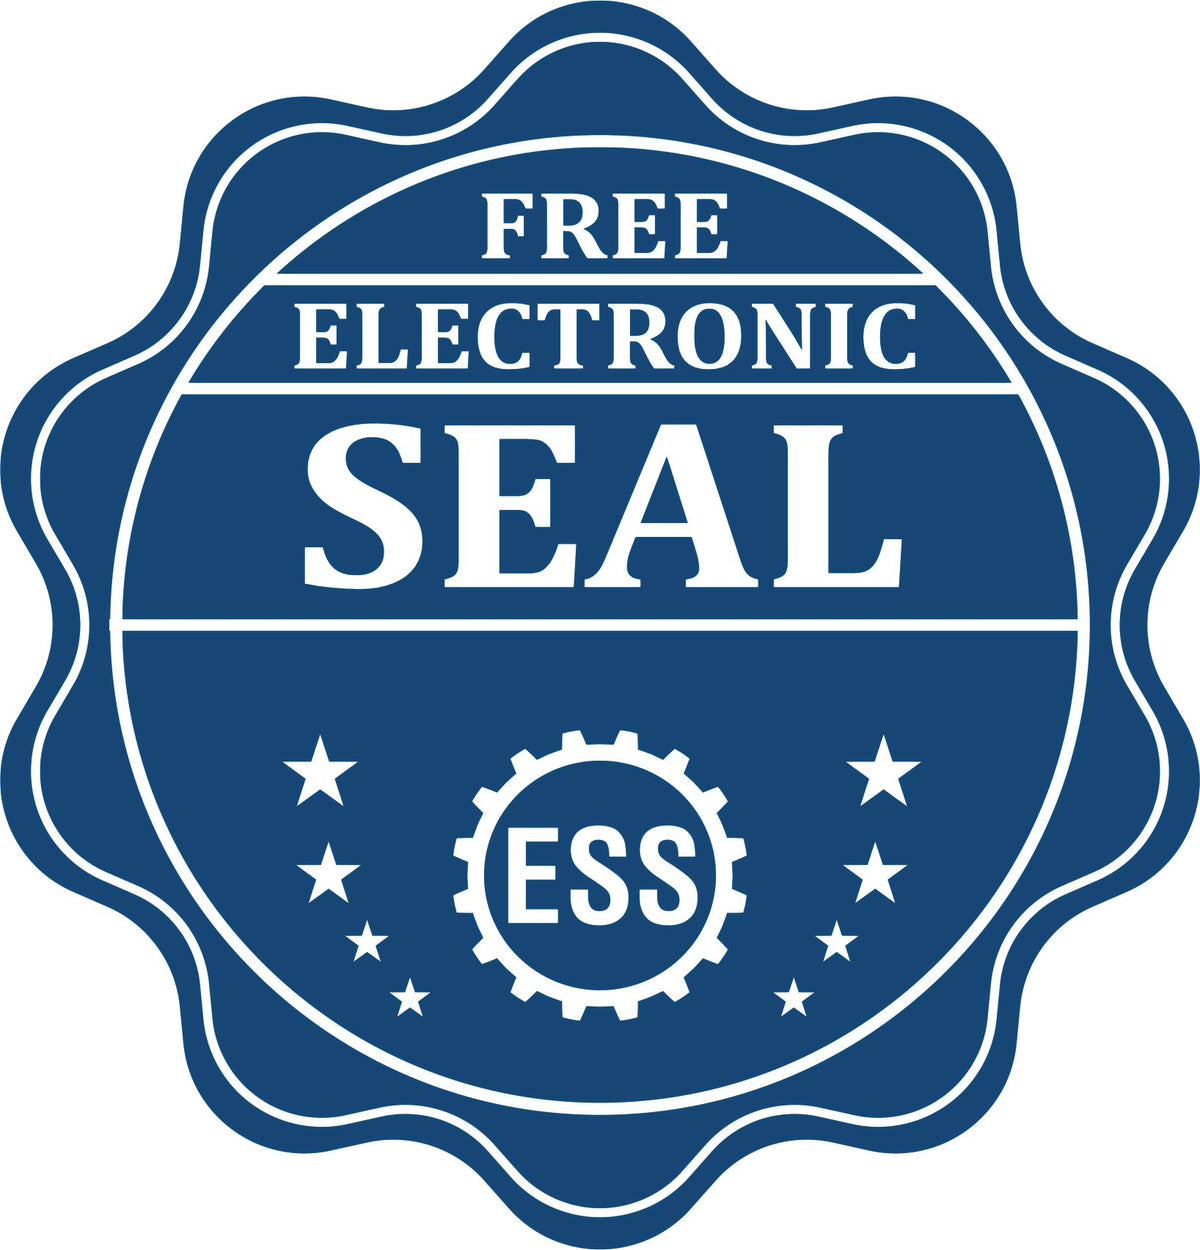 A badge showing a free electronic seal for the Handheld North Dakota Professional Engineer Embosser with stars and the ESS gear on the emblem.